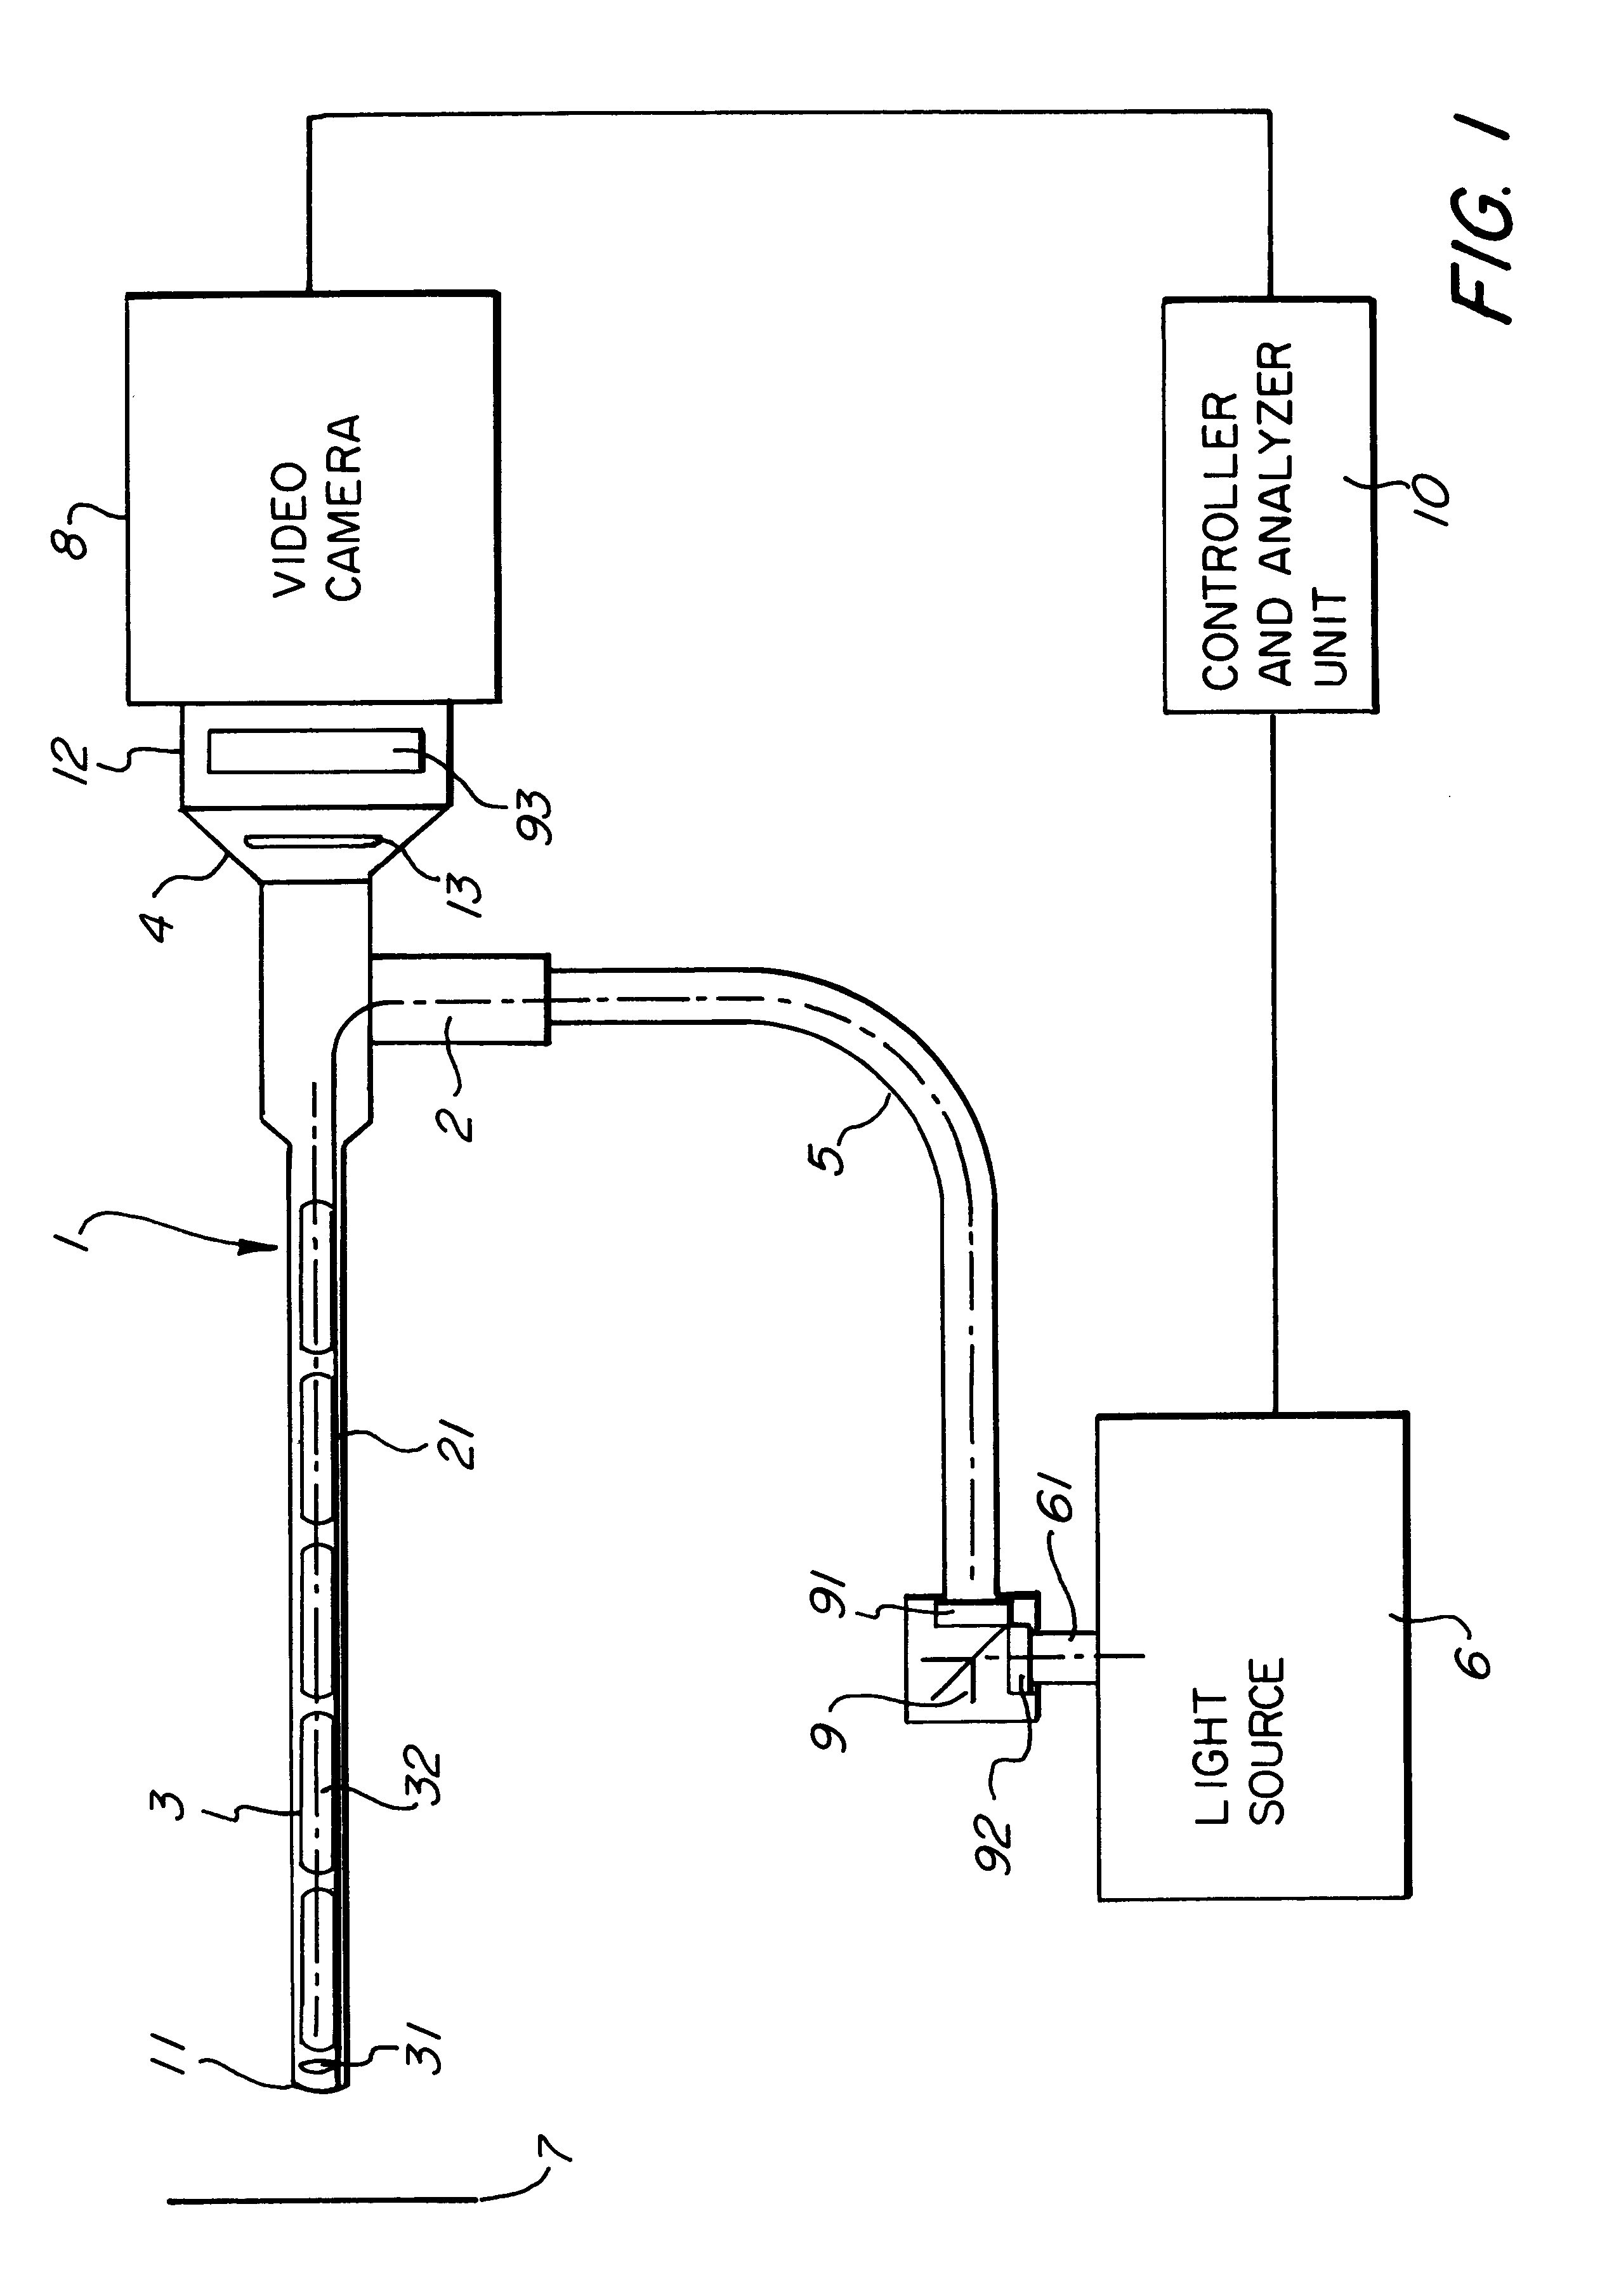 Method of and devices for fluorescence diagnosis of tissue, particularly by endoscopy